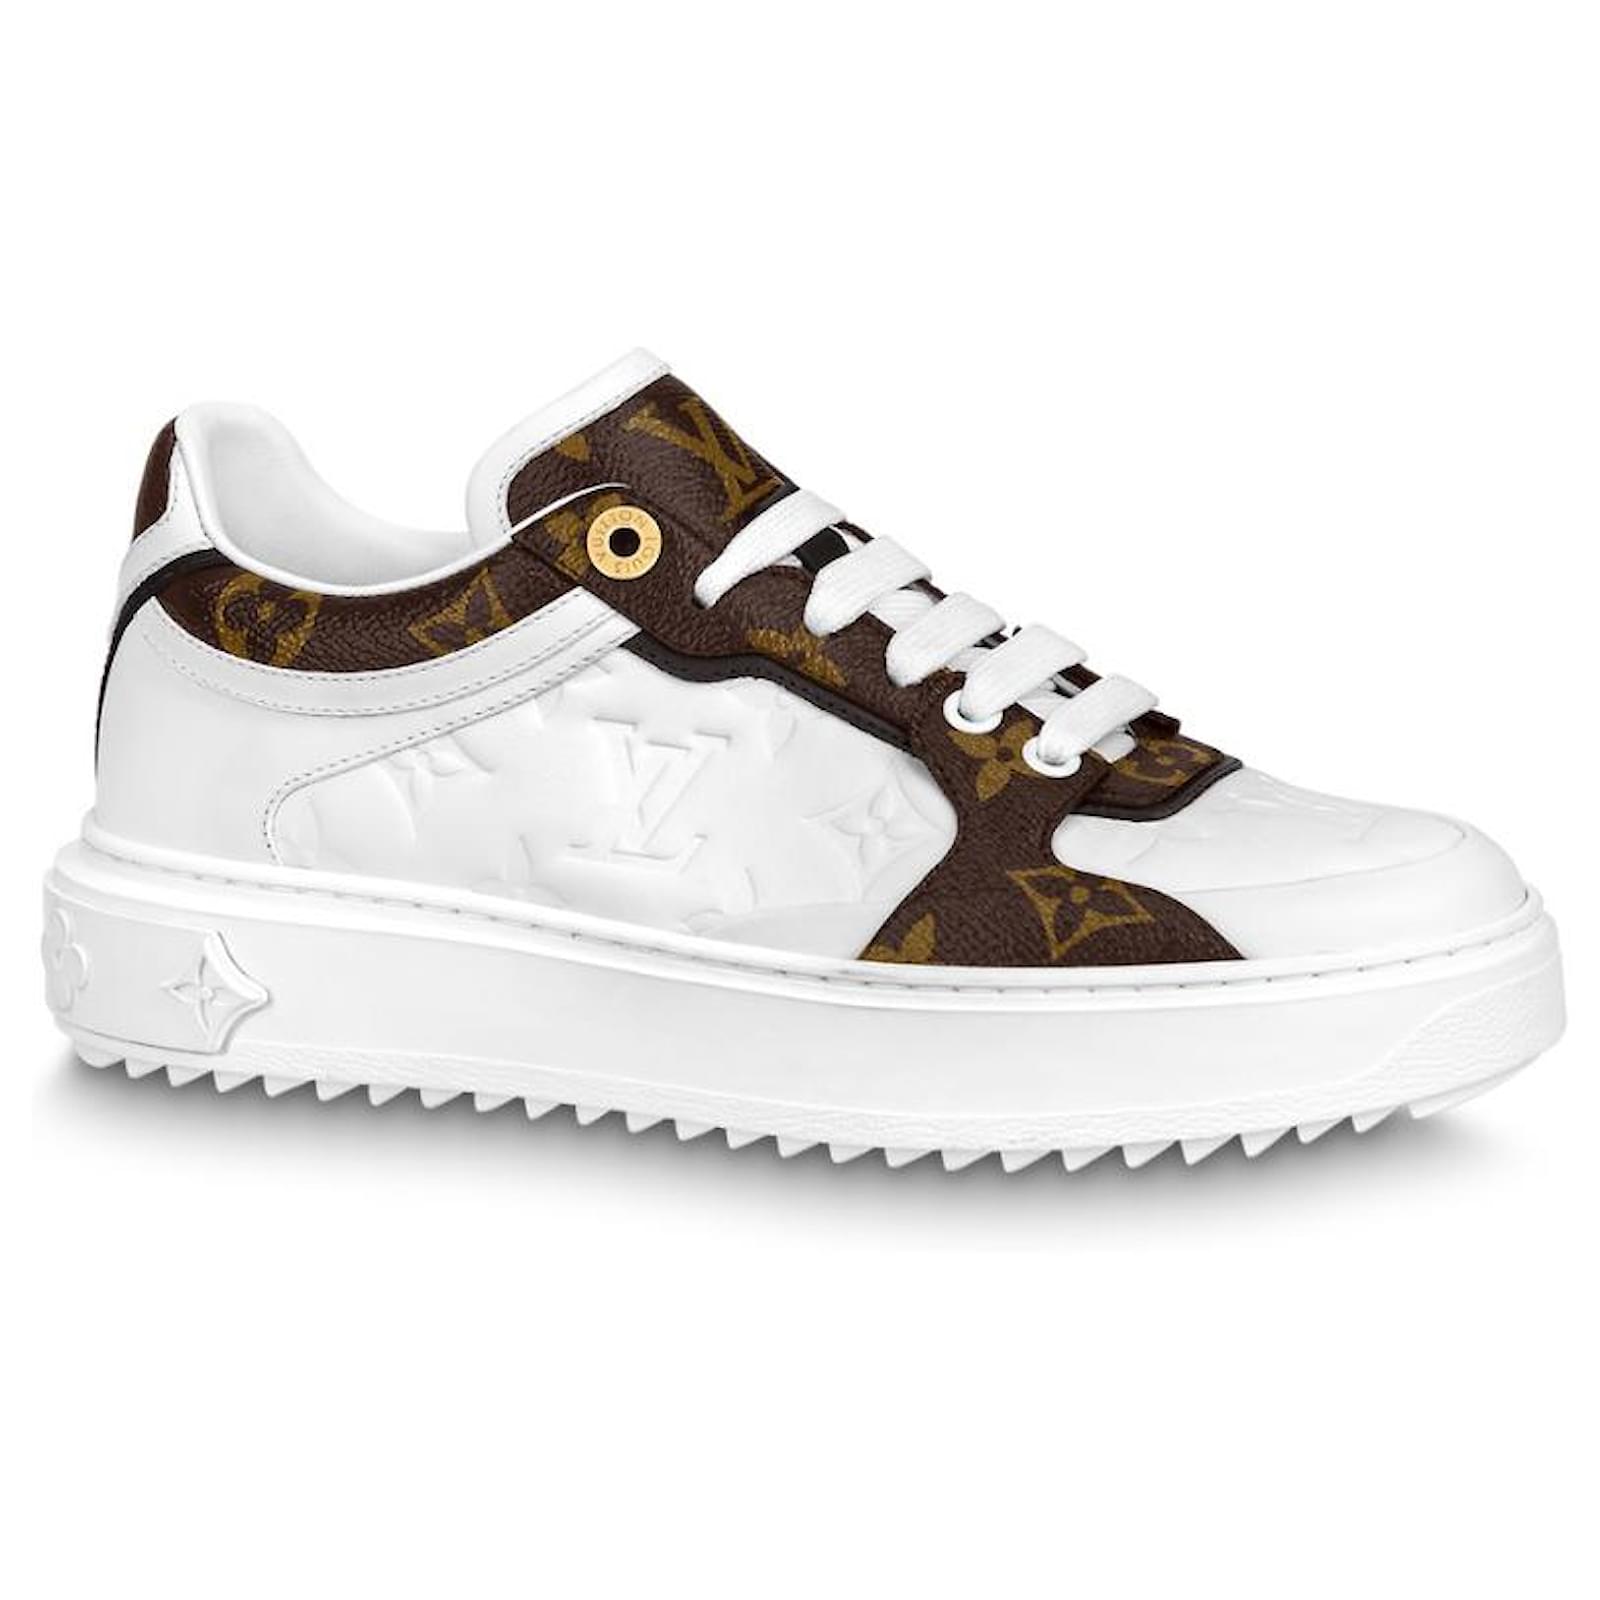 Sneakers Louis Vuitton LV Time Out Sneakers New